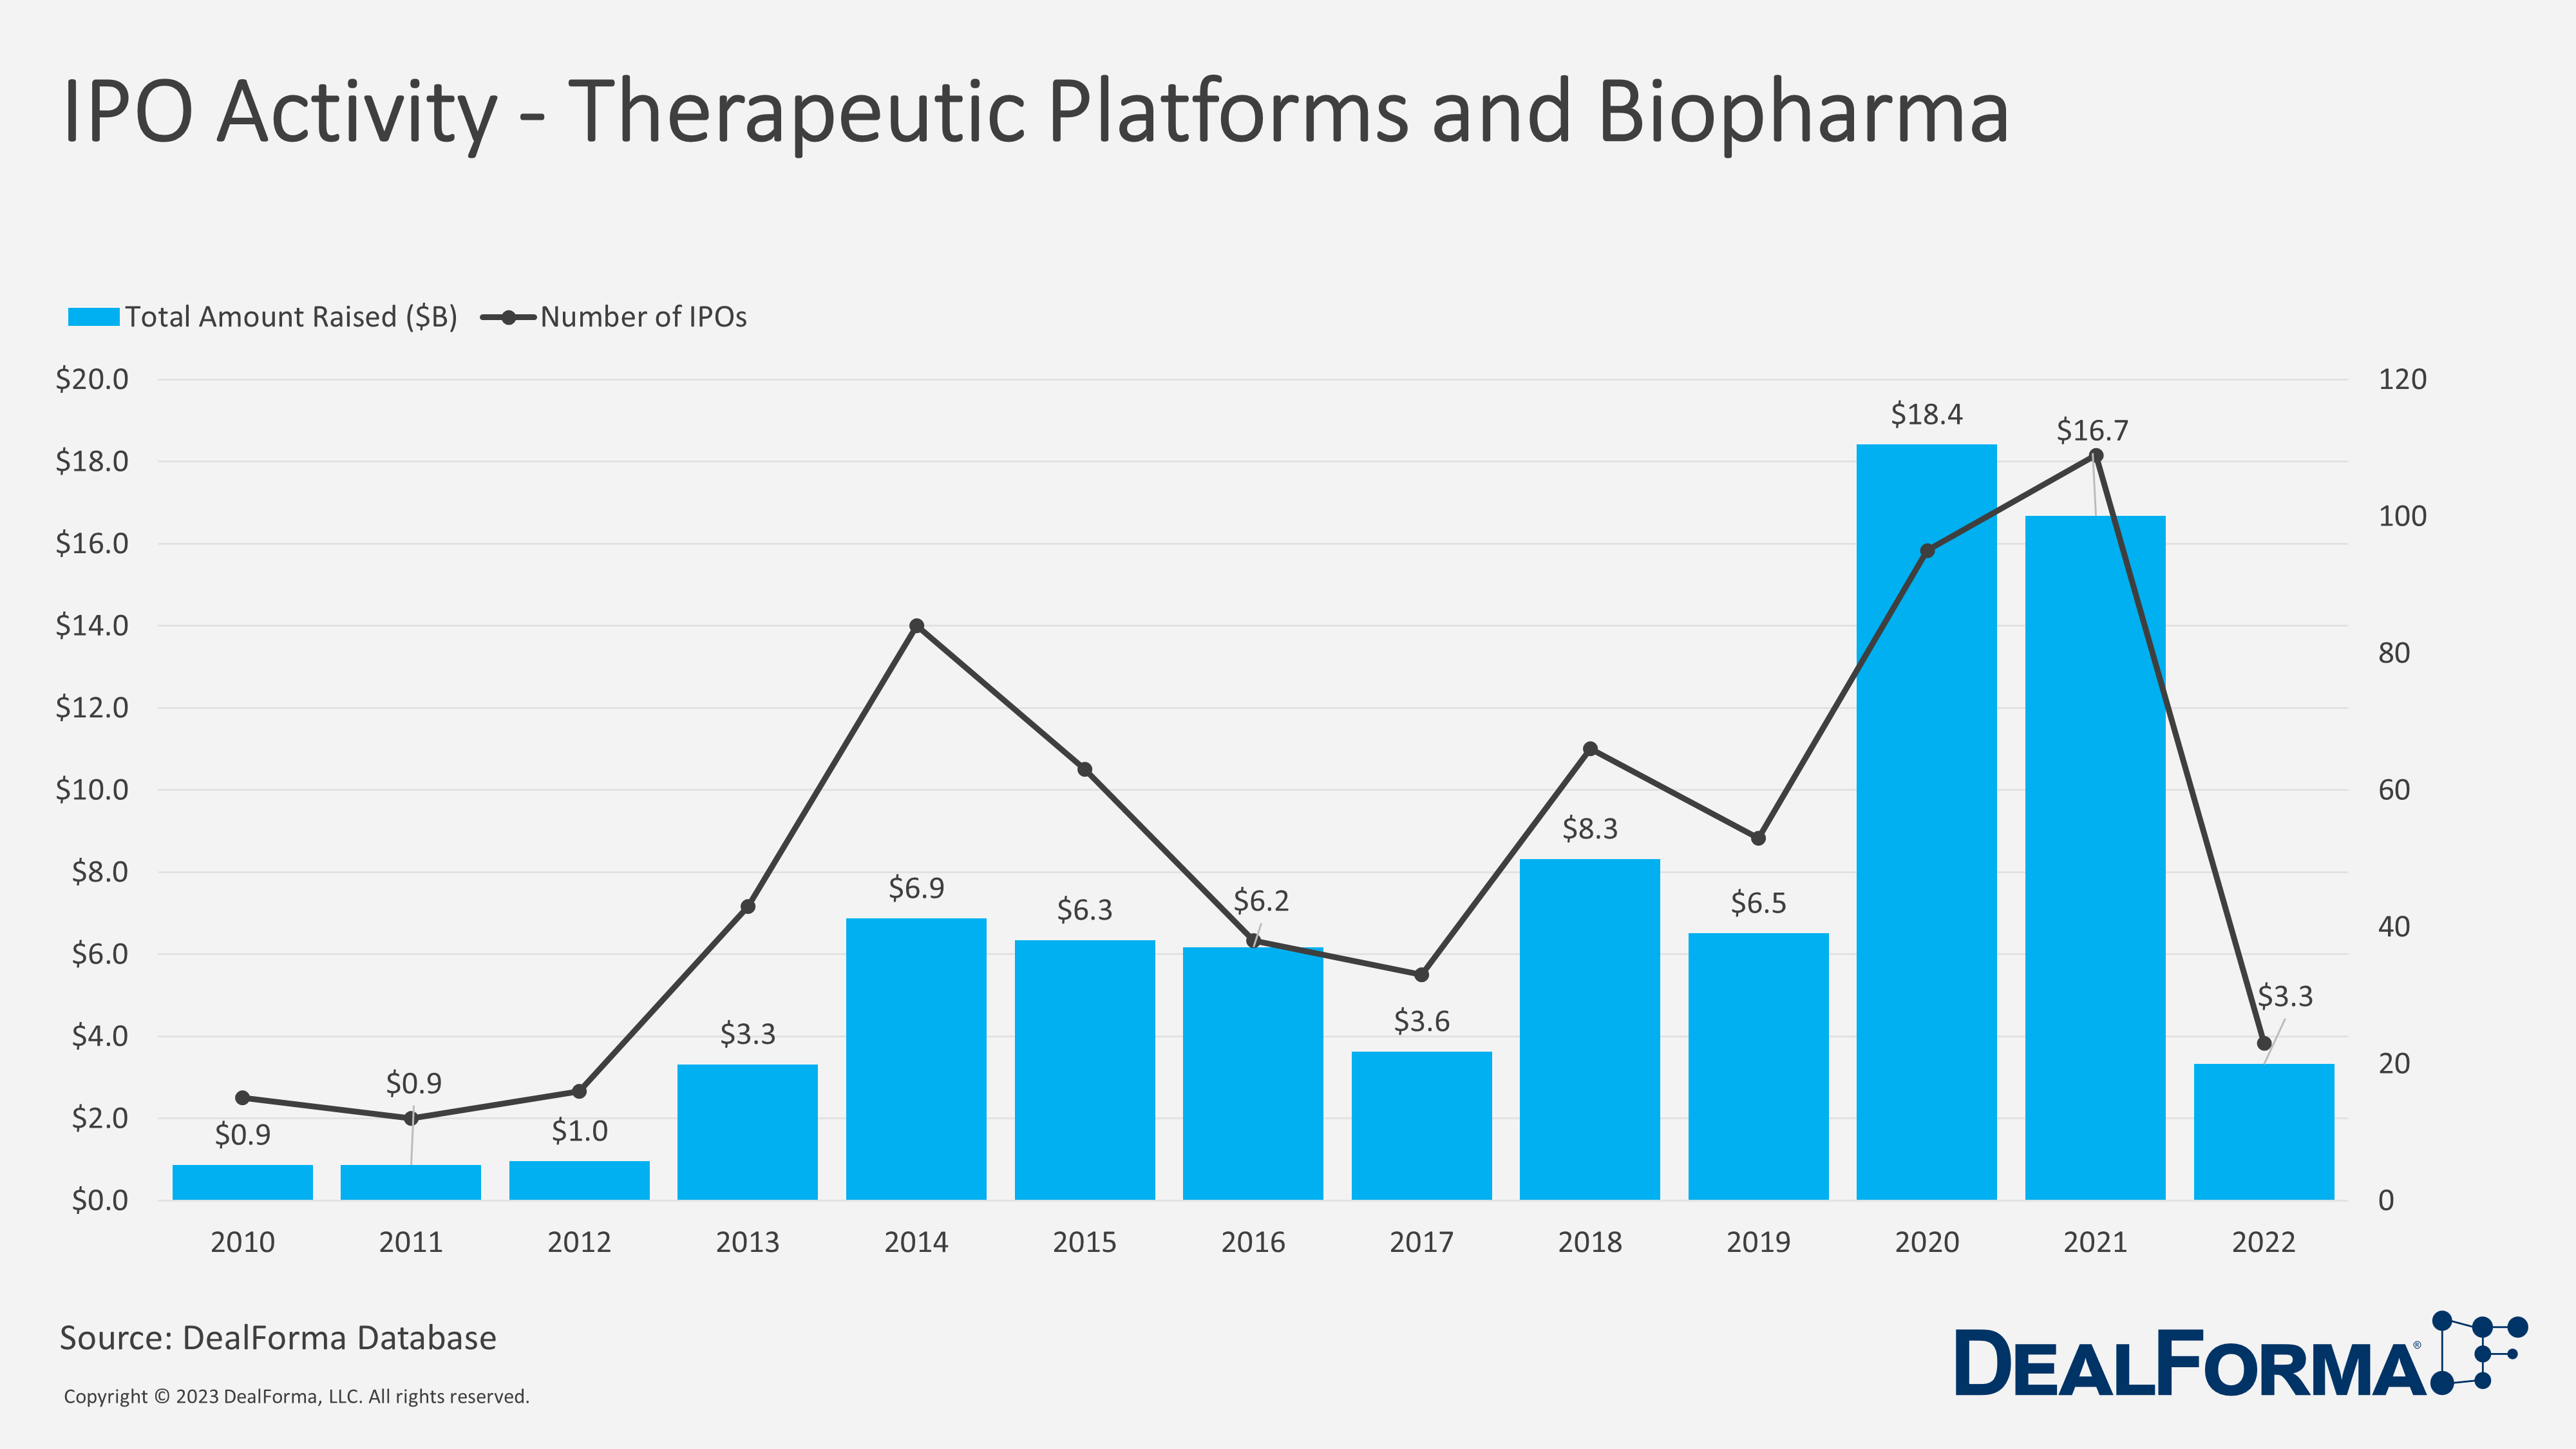 IPO Activity - Therapeutic Platforms and Biopharma